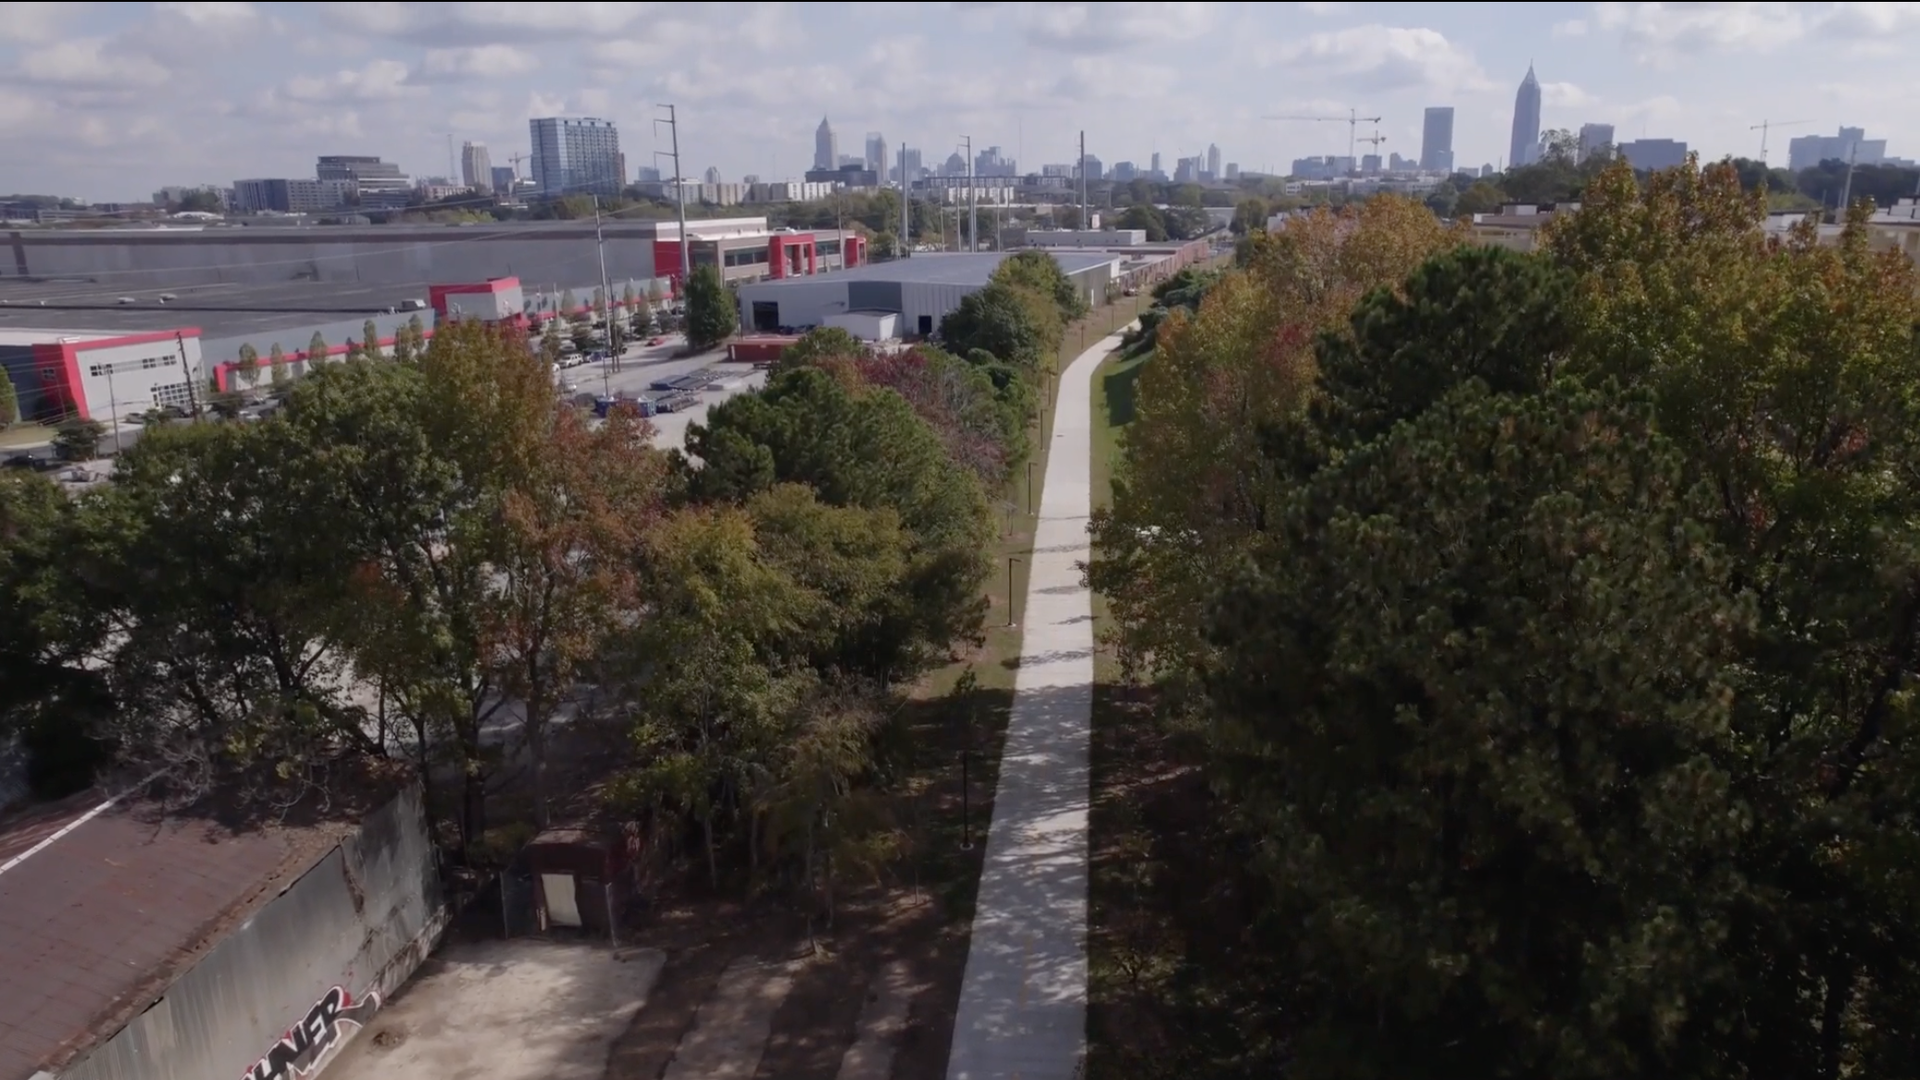 An aerial view of a Beltline path running through trees toward the city skyline of downtown Atlanta